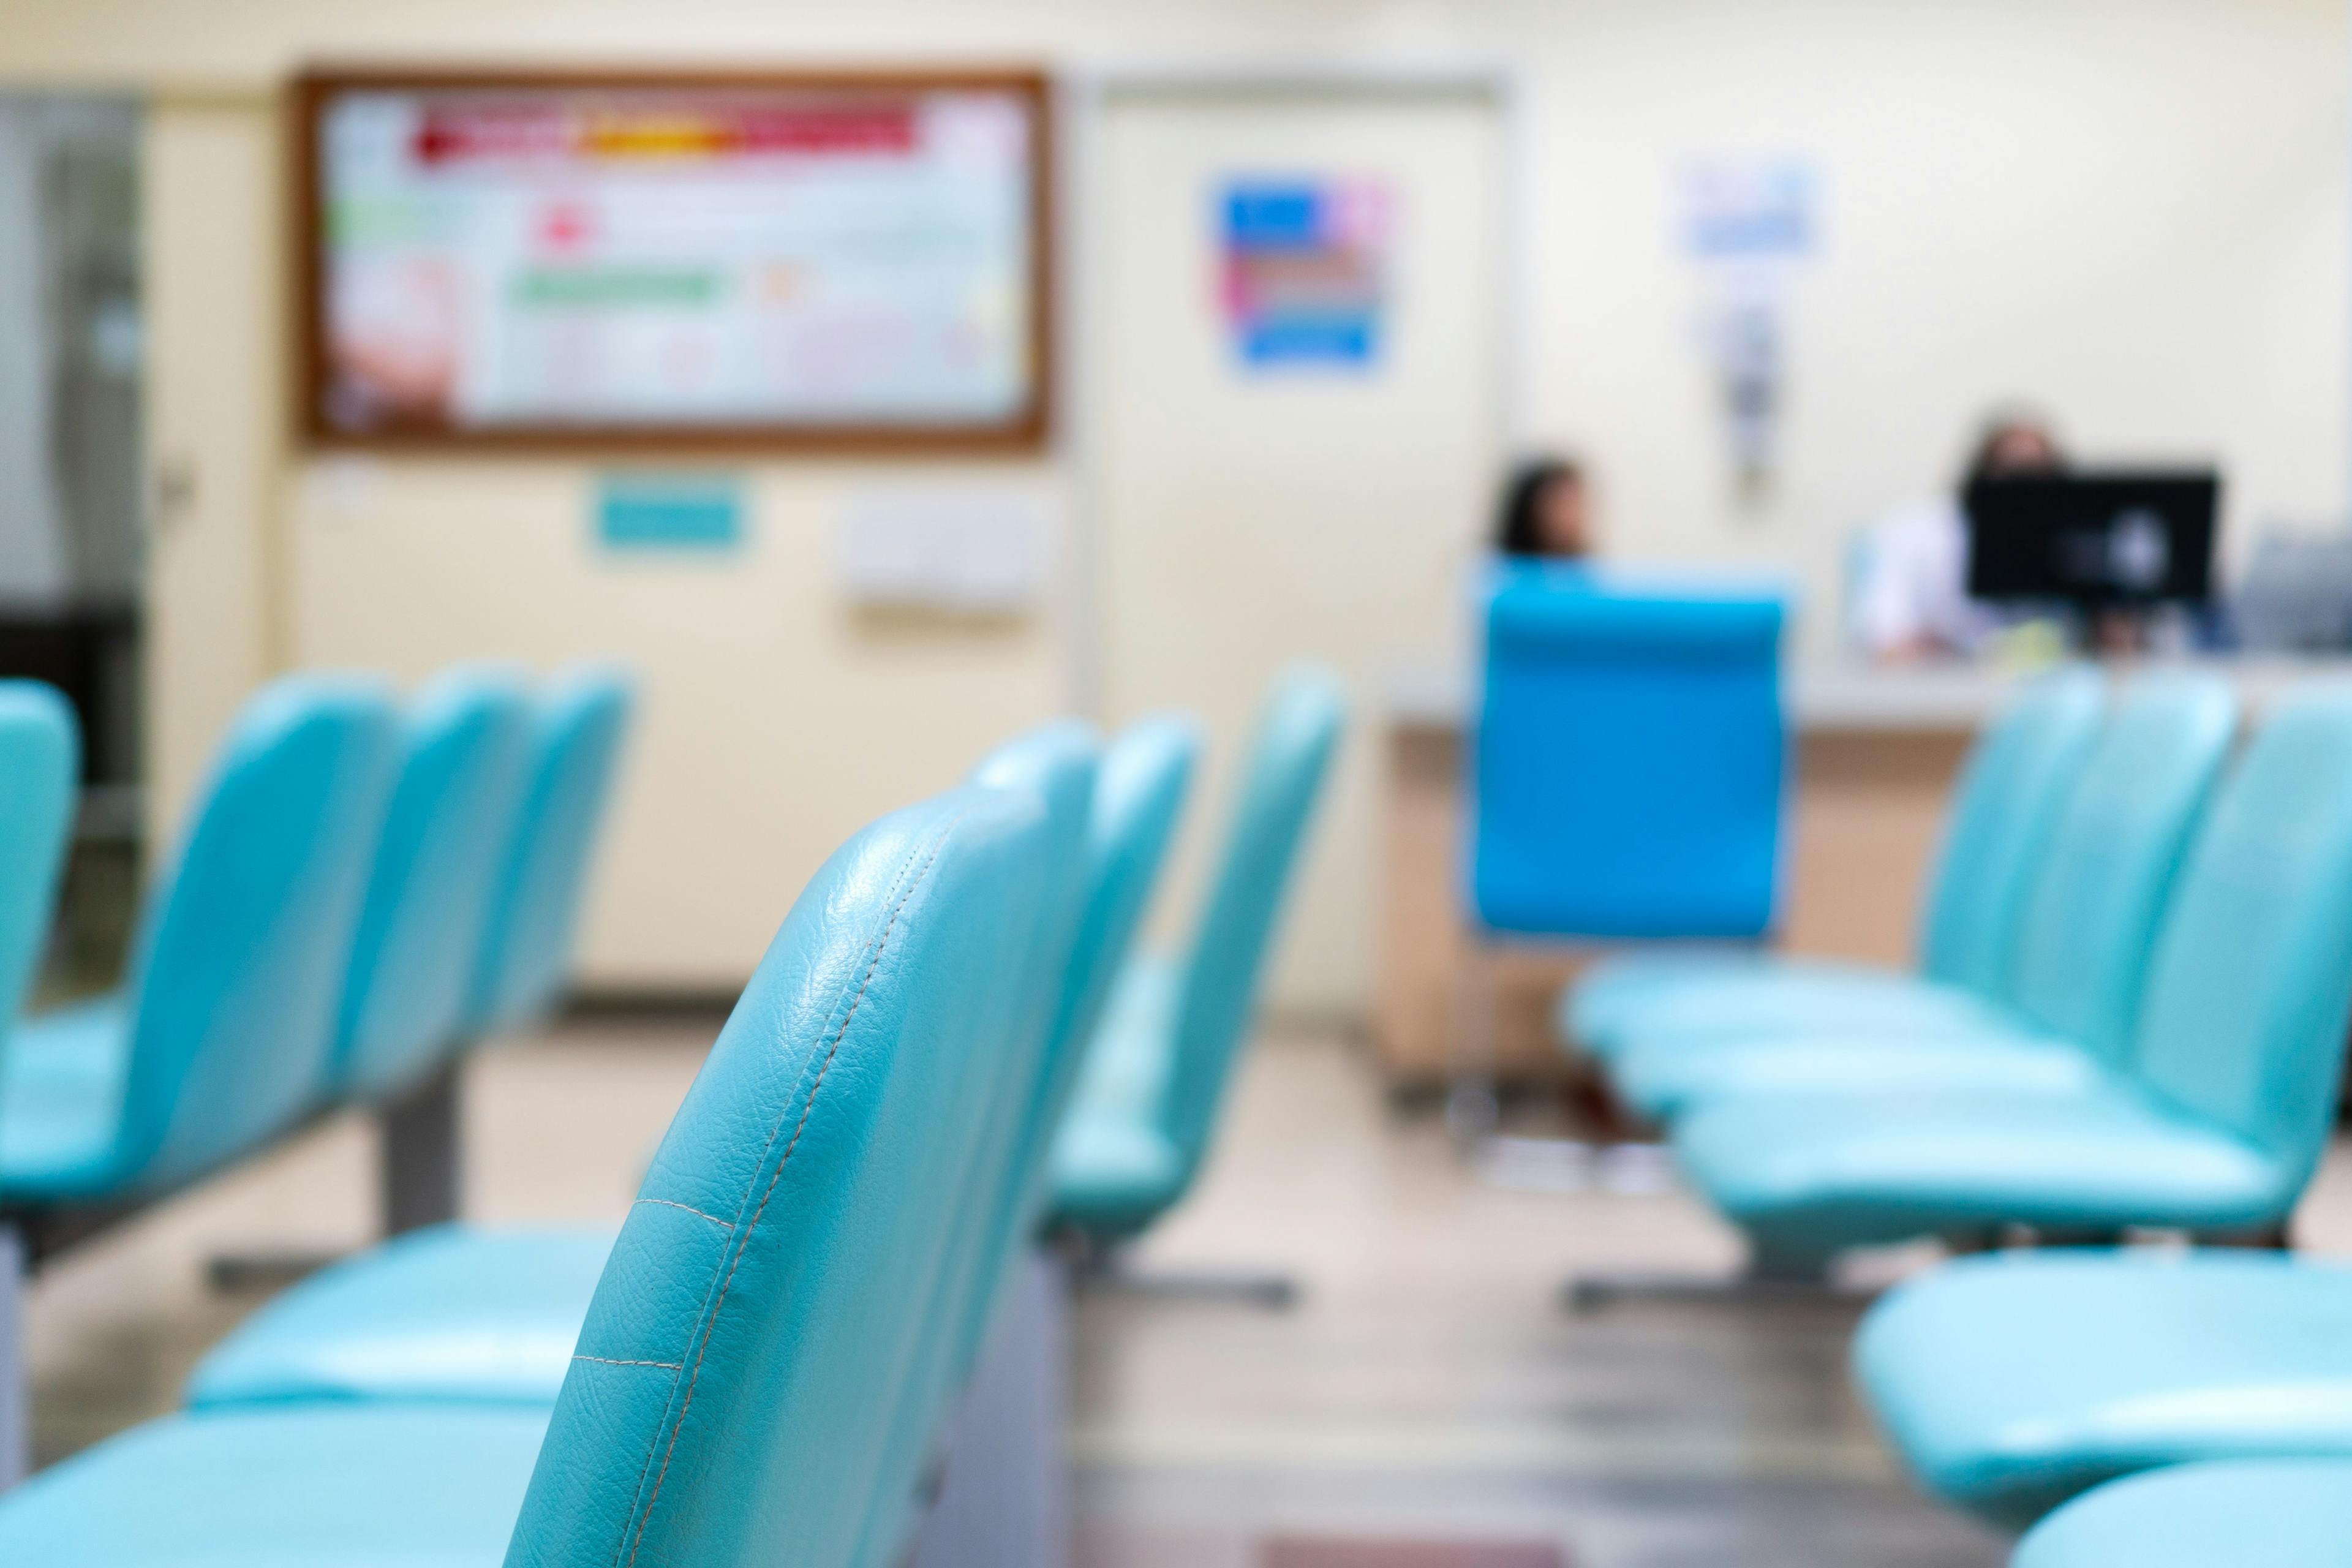 Empty blue chair in waiting room at hospital with blurred background of nurse desk - AePatt Journey - stock.adobe.com